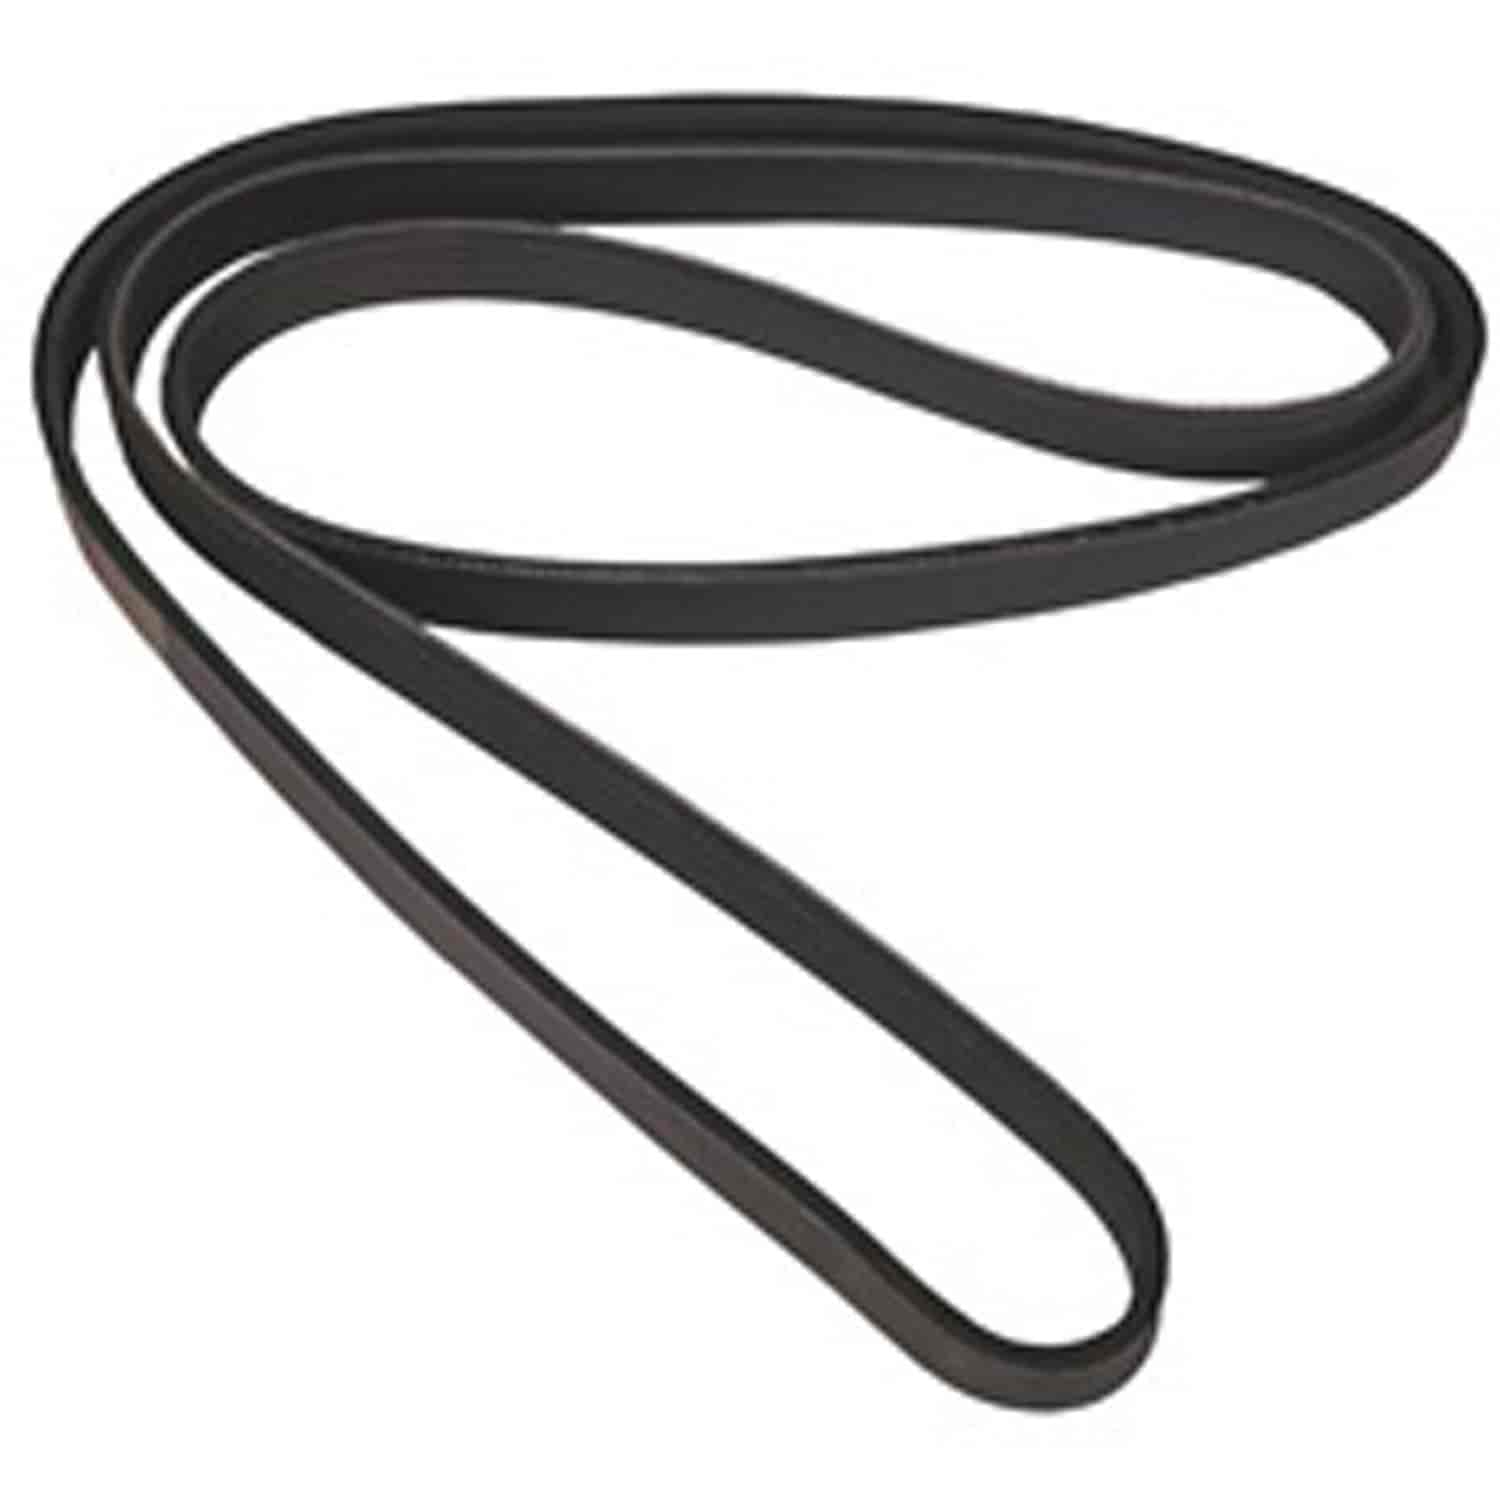 Stock replacement serpentine belt from Omix-ADA, Fits 93-95 Jeep Grand Cherokees with 4.0 li